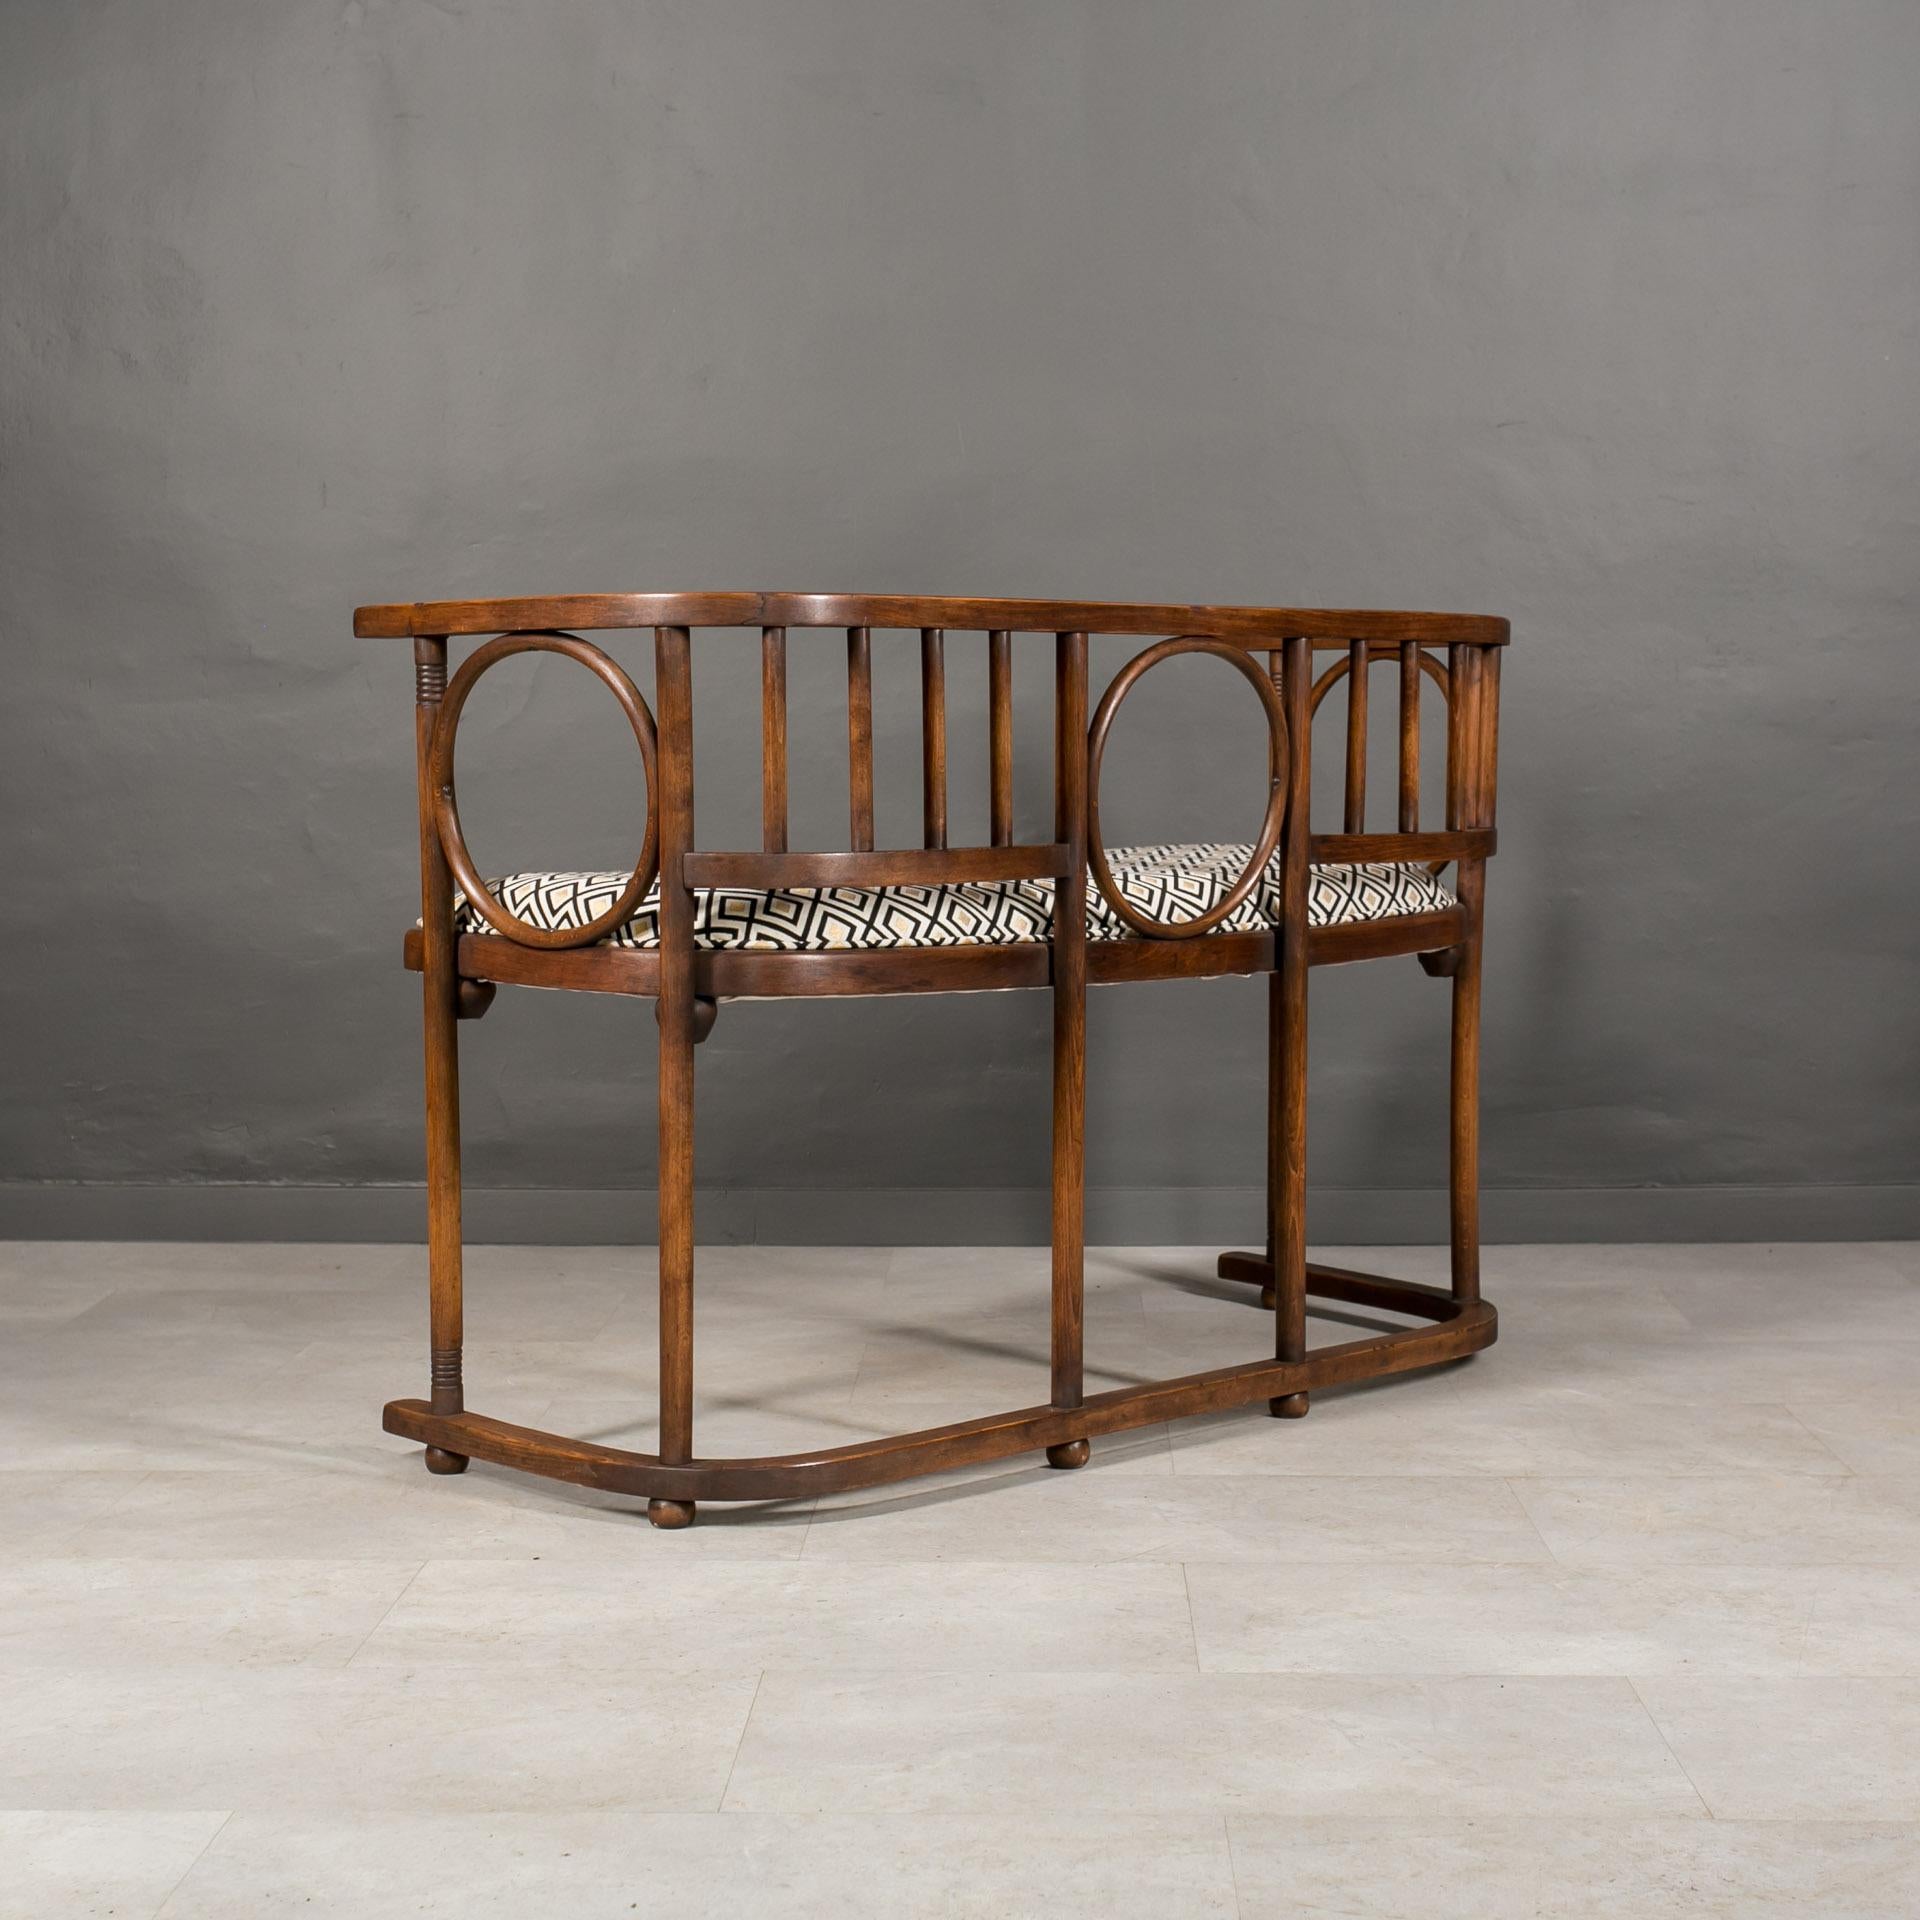 Beech Early 20th Century Bentwood Bench Settee by J. Hoffmann for Thonet - Mundus For Sale